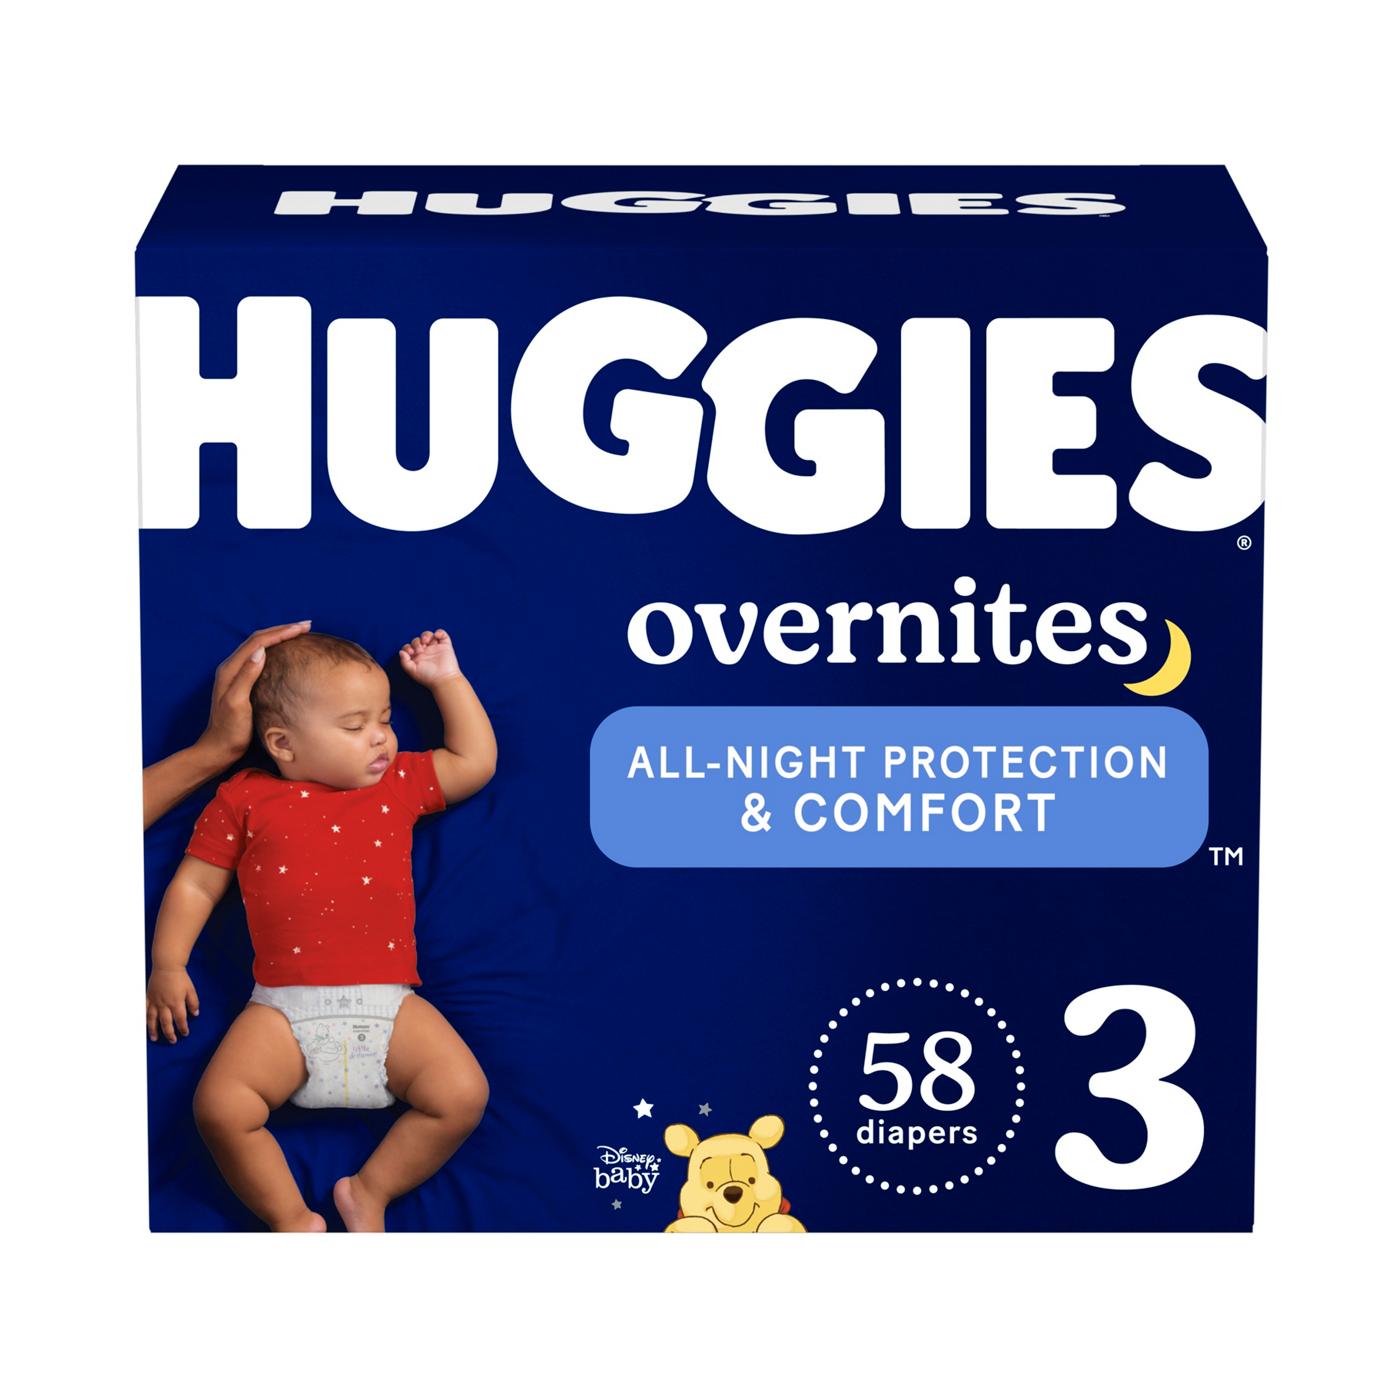 Huggies Overnites Nighttime Baby Diapers - Size 3; image 1 of 4